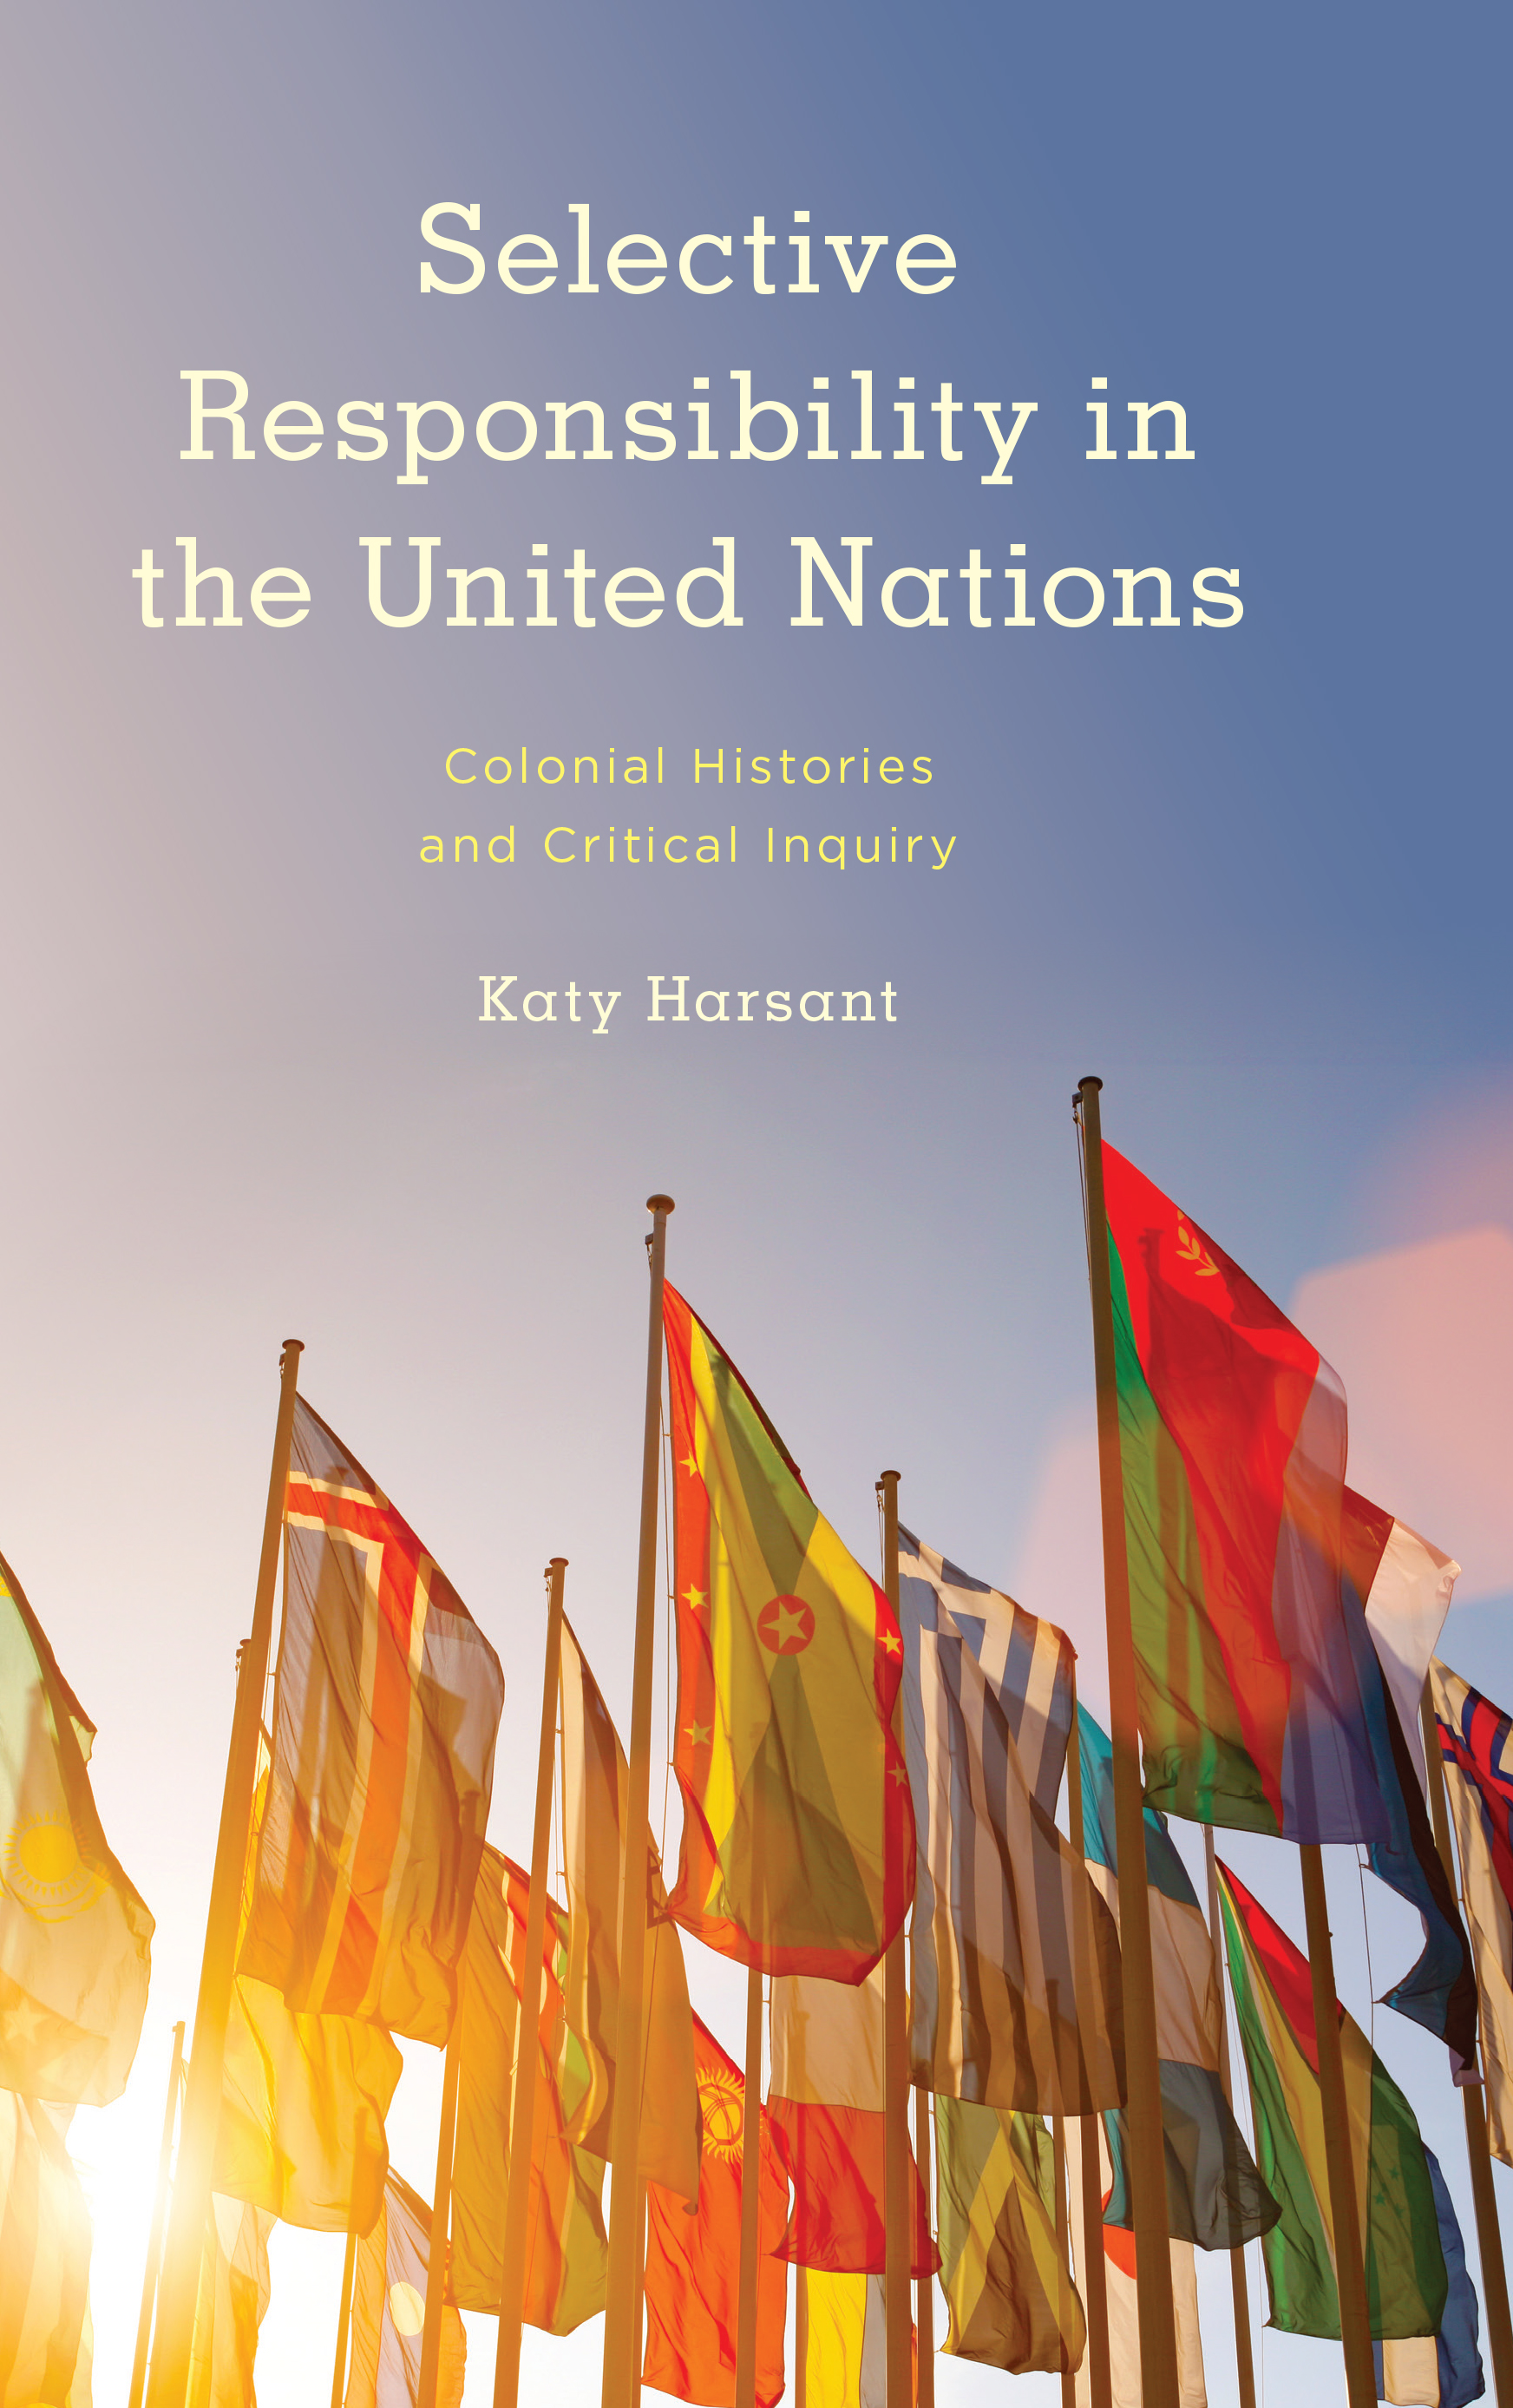 Selective Responsibility in the United Nations: Colonial Histories and Critical Inquiry